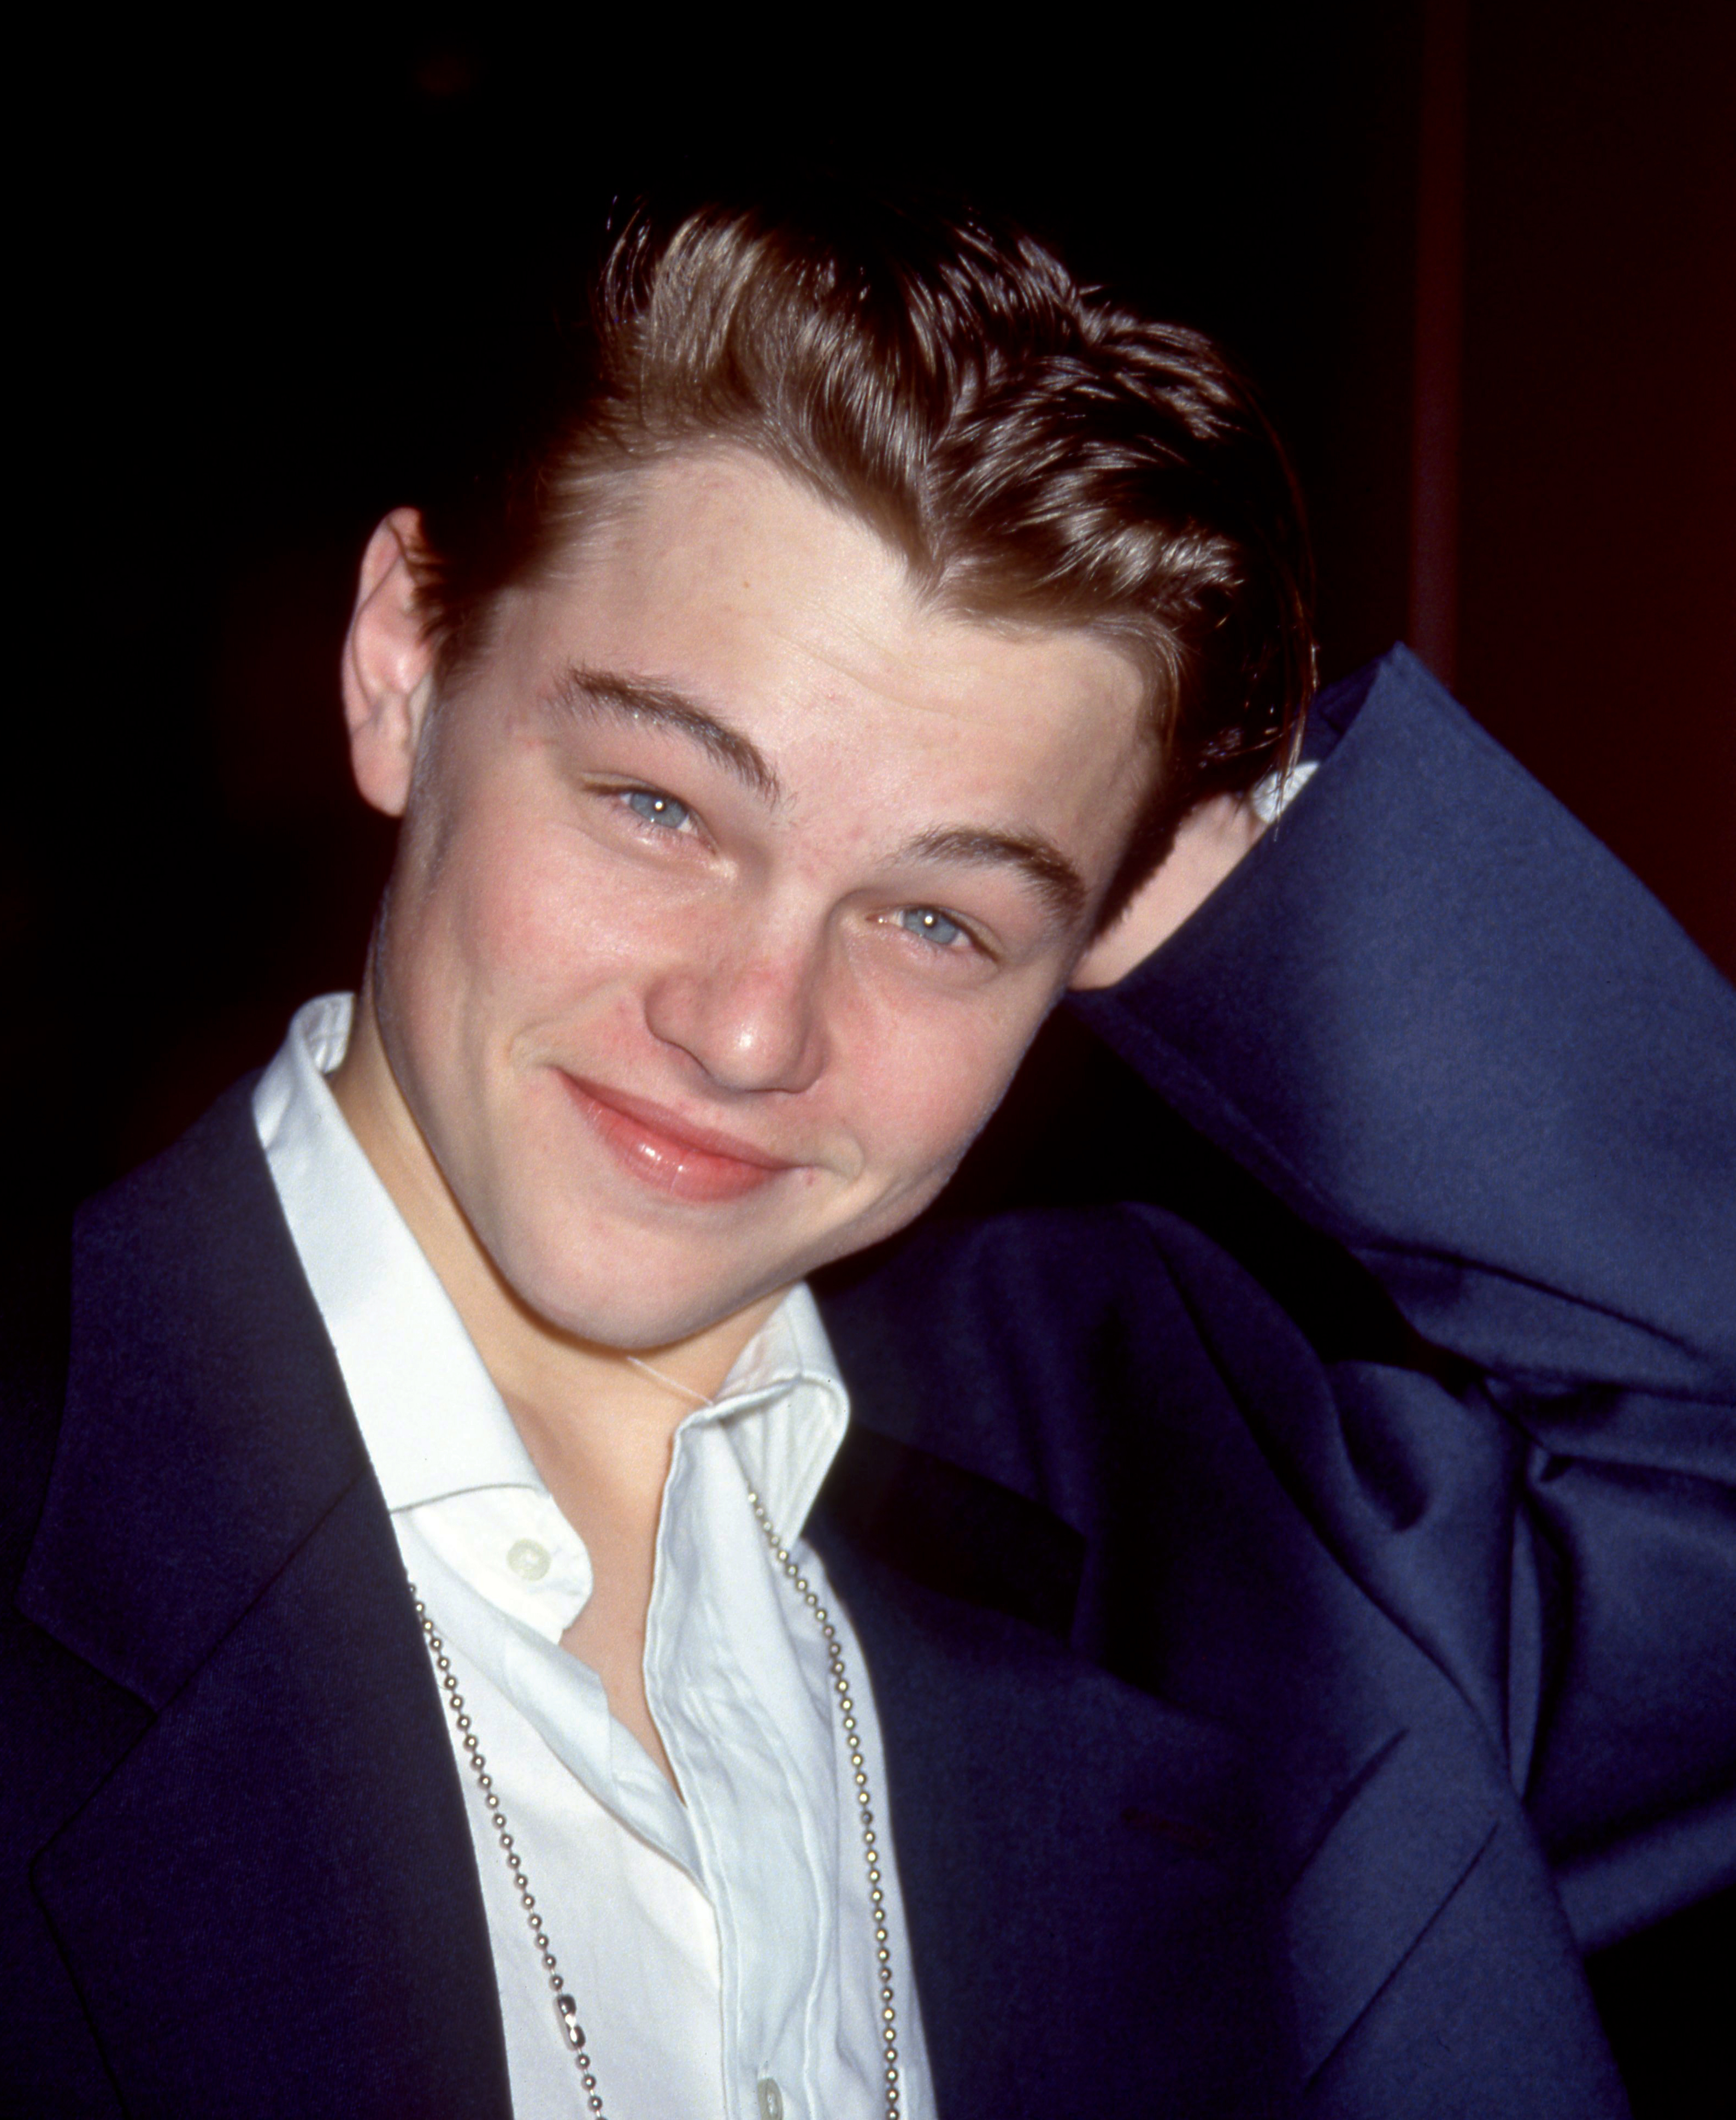 Leonardo DiCaprio at the Los Angeles premiere of "This Boys Life," 1993 | Source: Getty Images